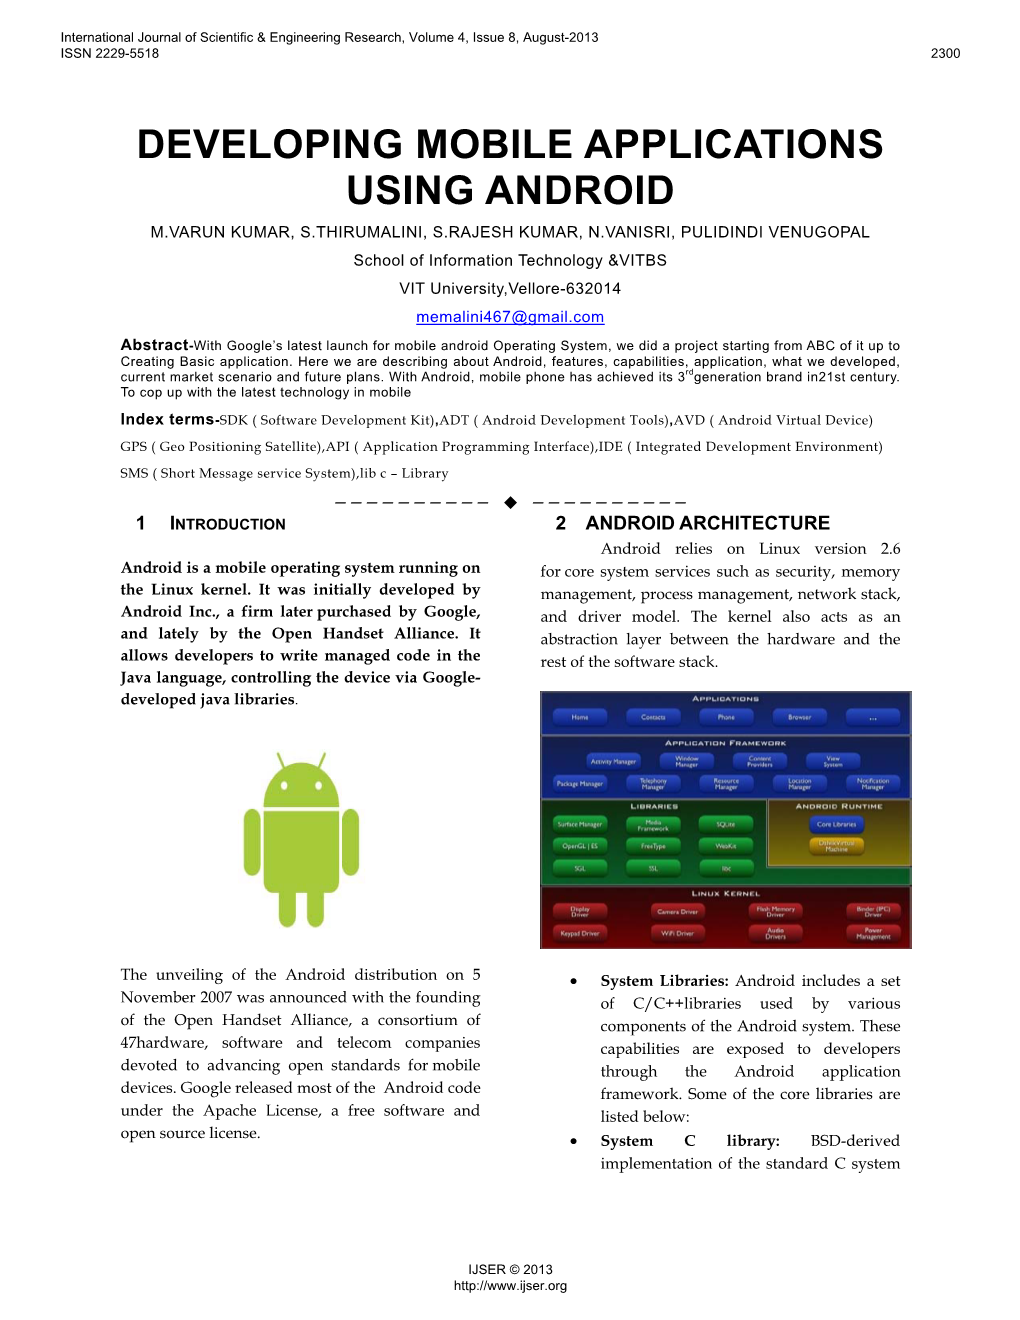 Developing Mobile Applications Using Android